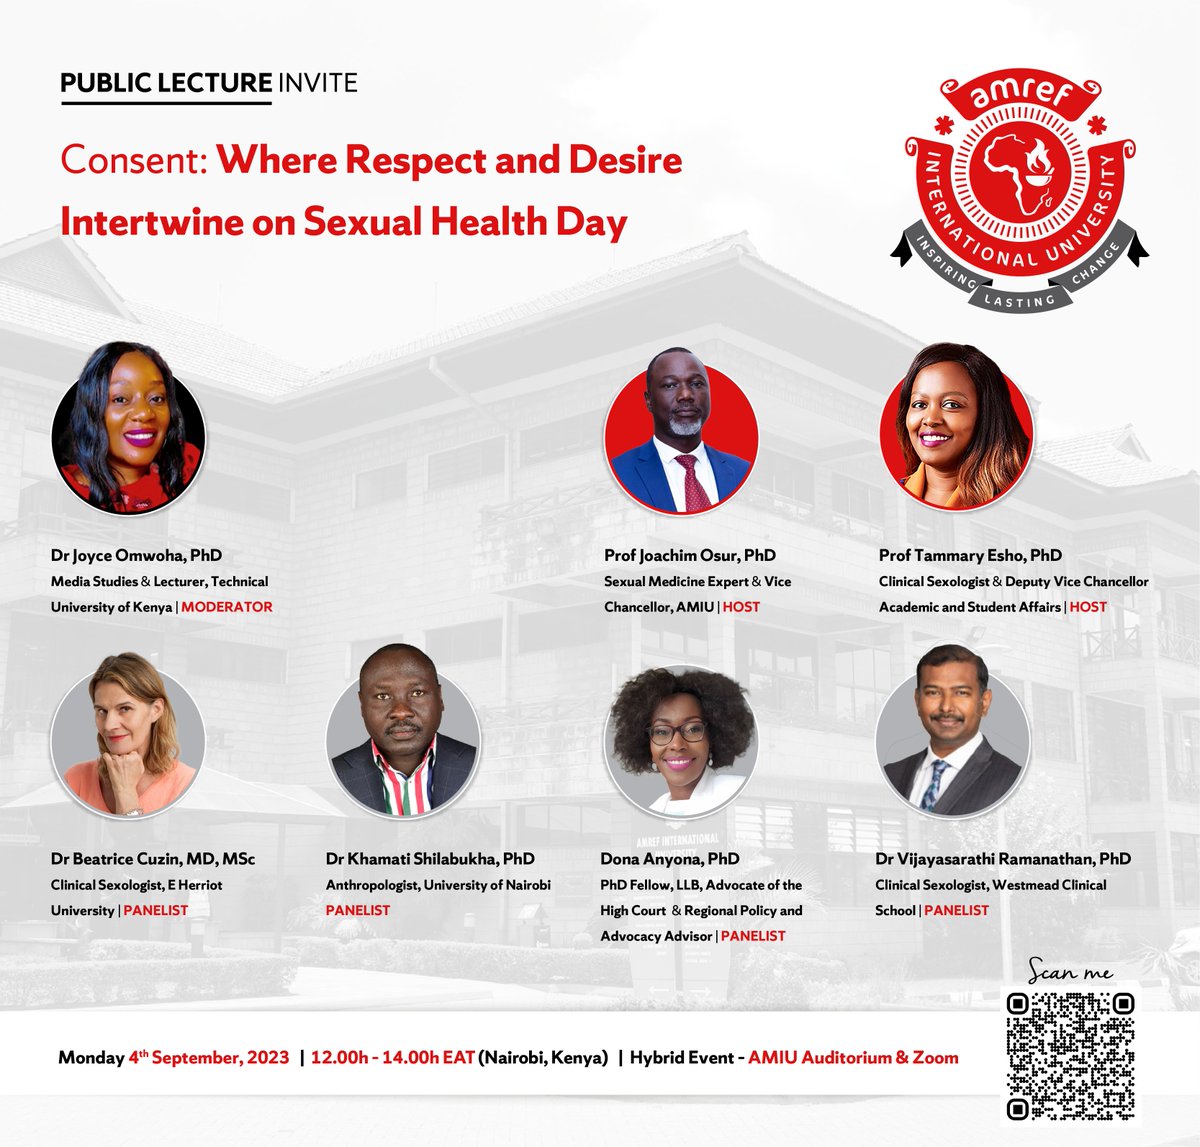 Webinar Invitation
This Monday 4th Sept 2023 on #SexualHealthDay join the conversation on where respect and desire intertwine. Time 12h00 - 14h00 EAT.  Register now, scan the poster or follow this link buff.ly/3L7tMAu
#WSHD2023
#Consent2023
#HumanSexuality